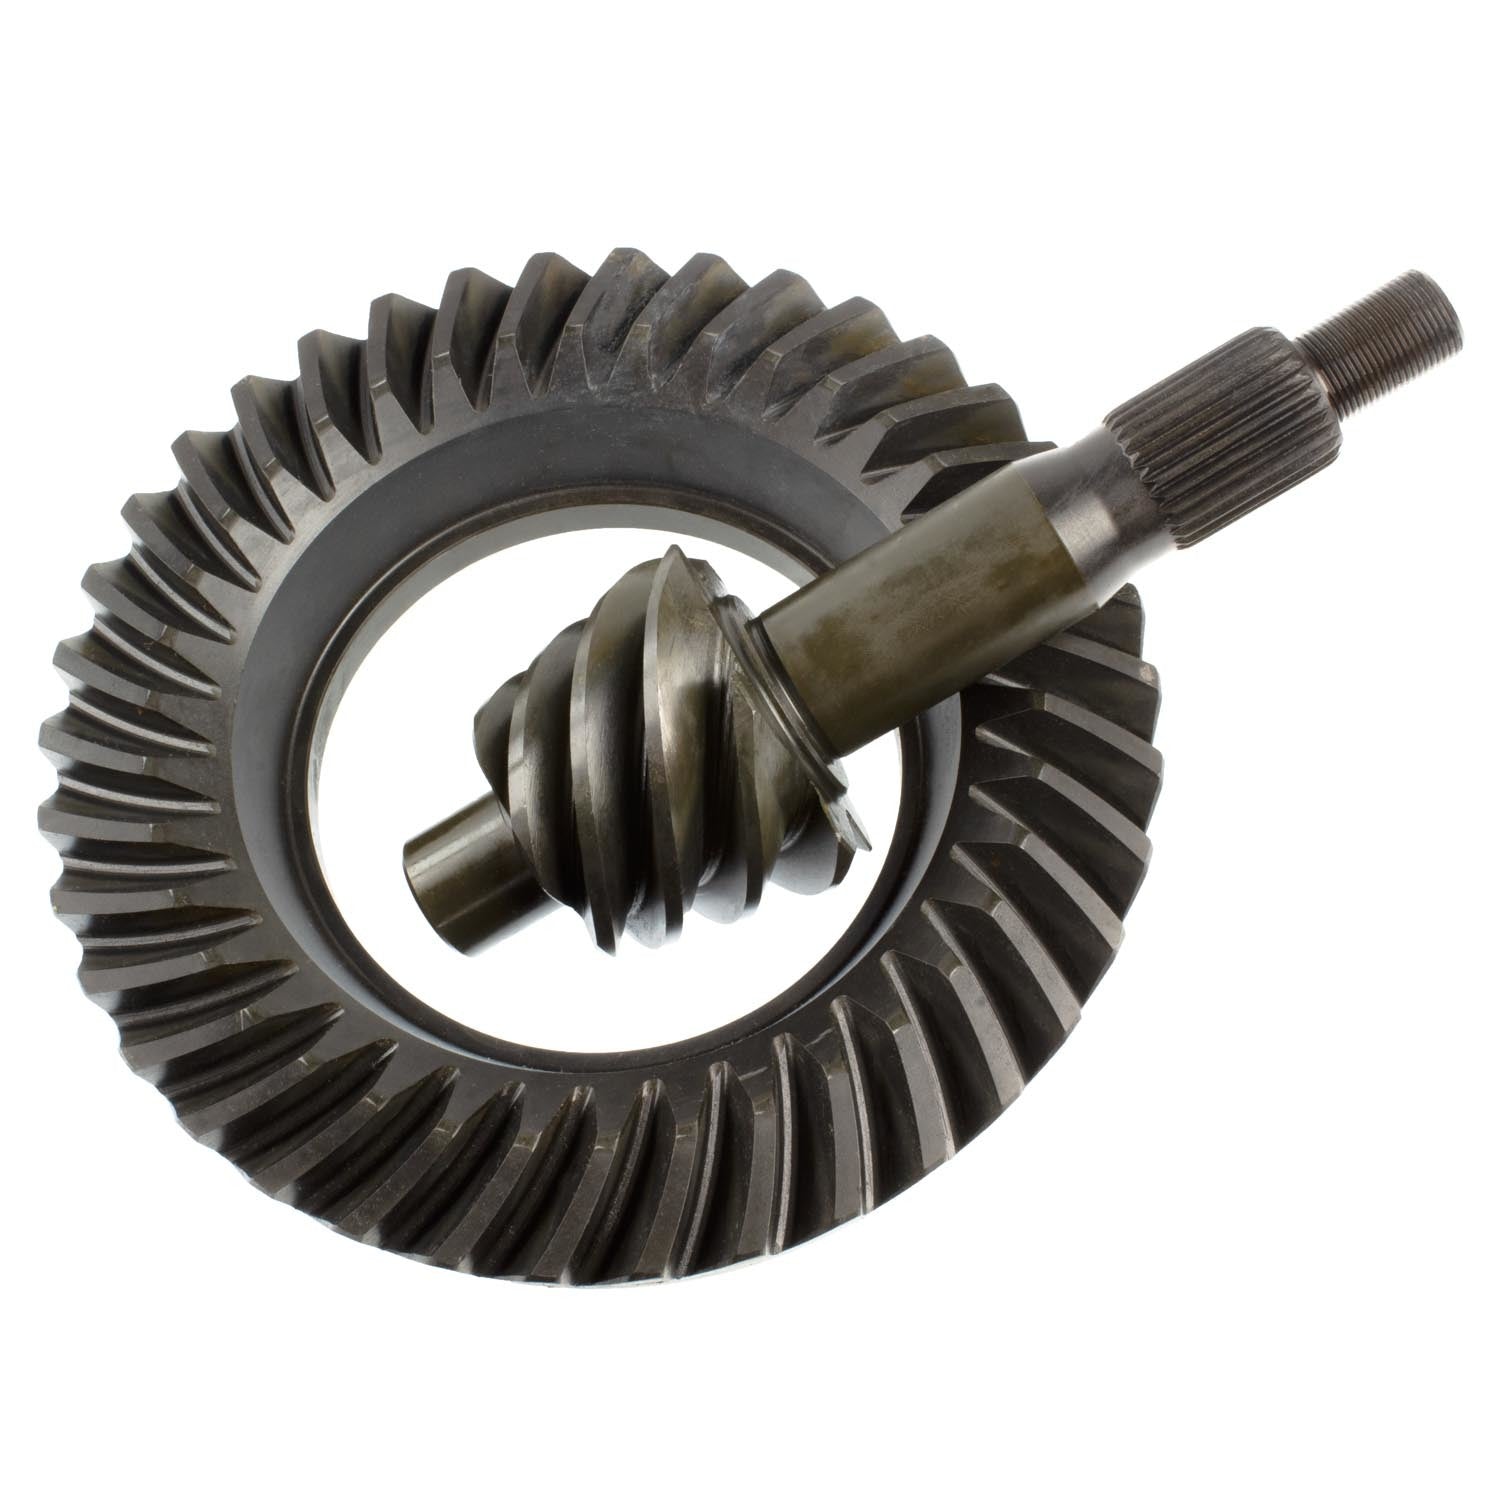 Excel Ring & Pinion Gear Set Ford 9in 6.33 Ratio